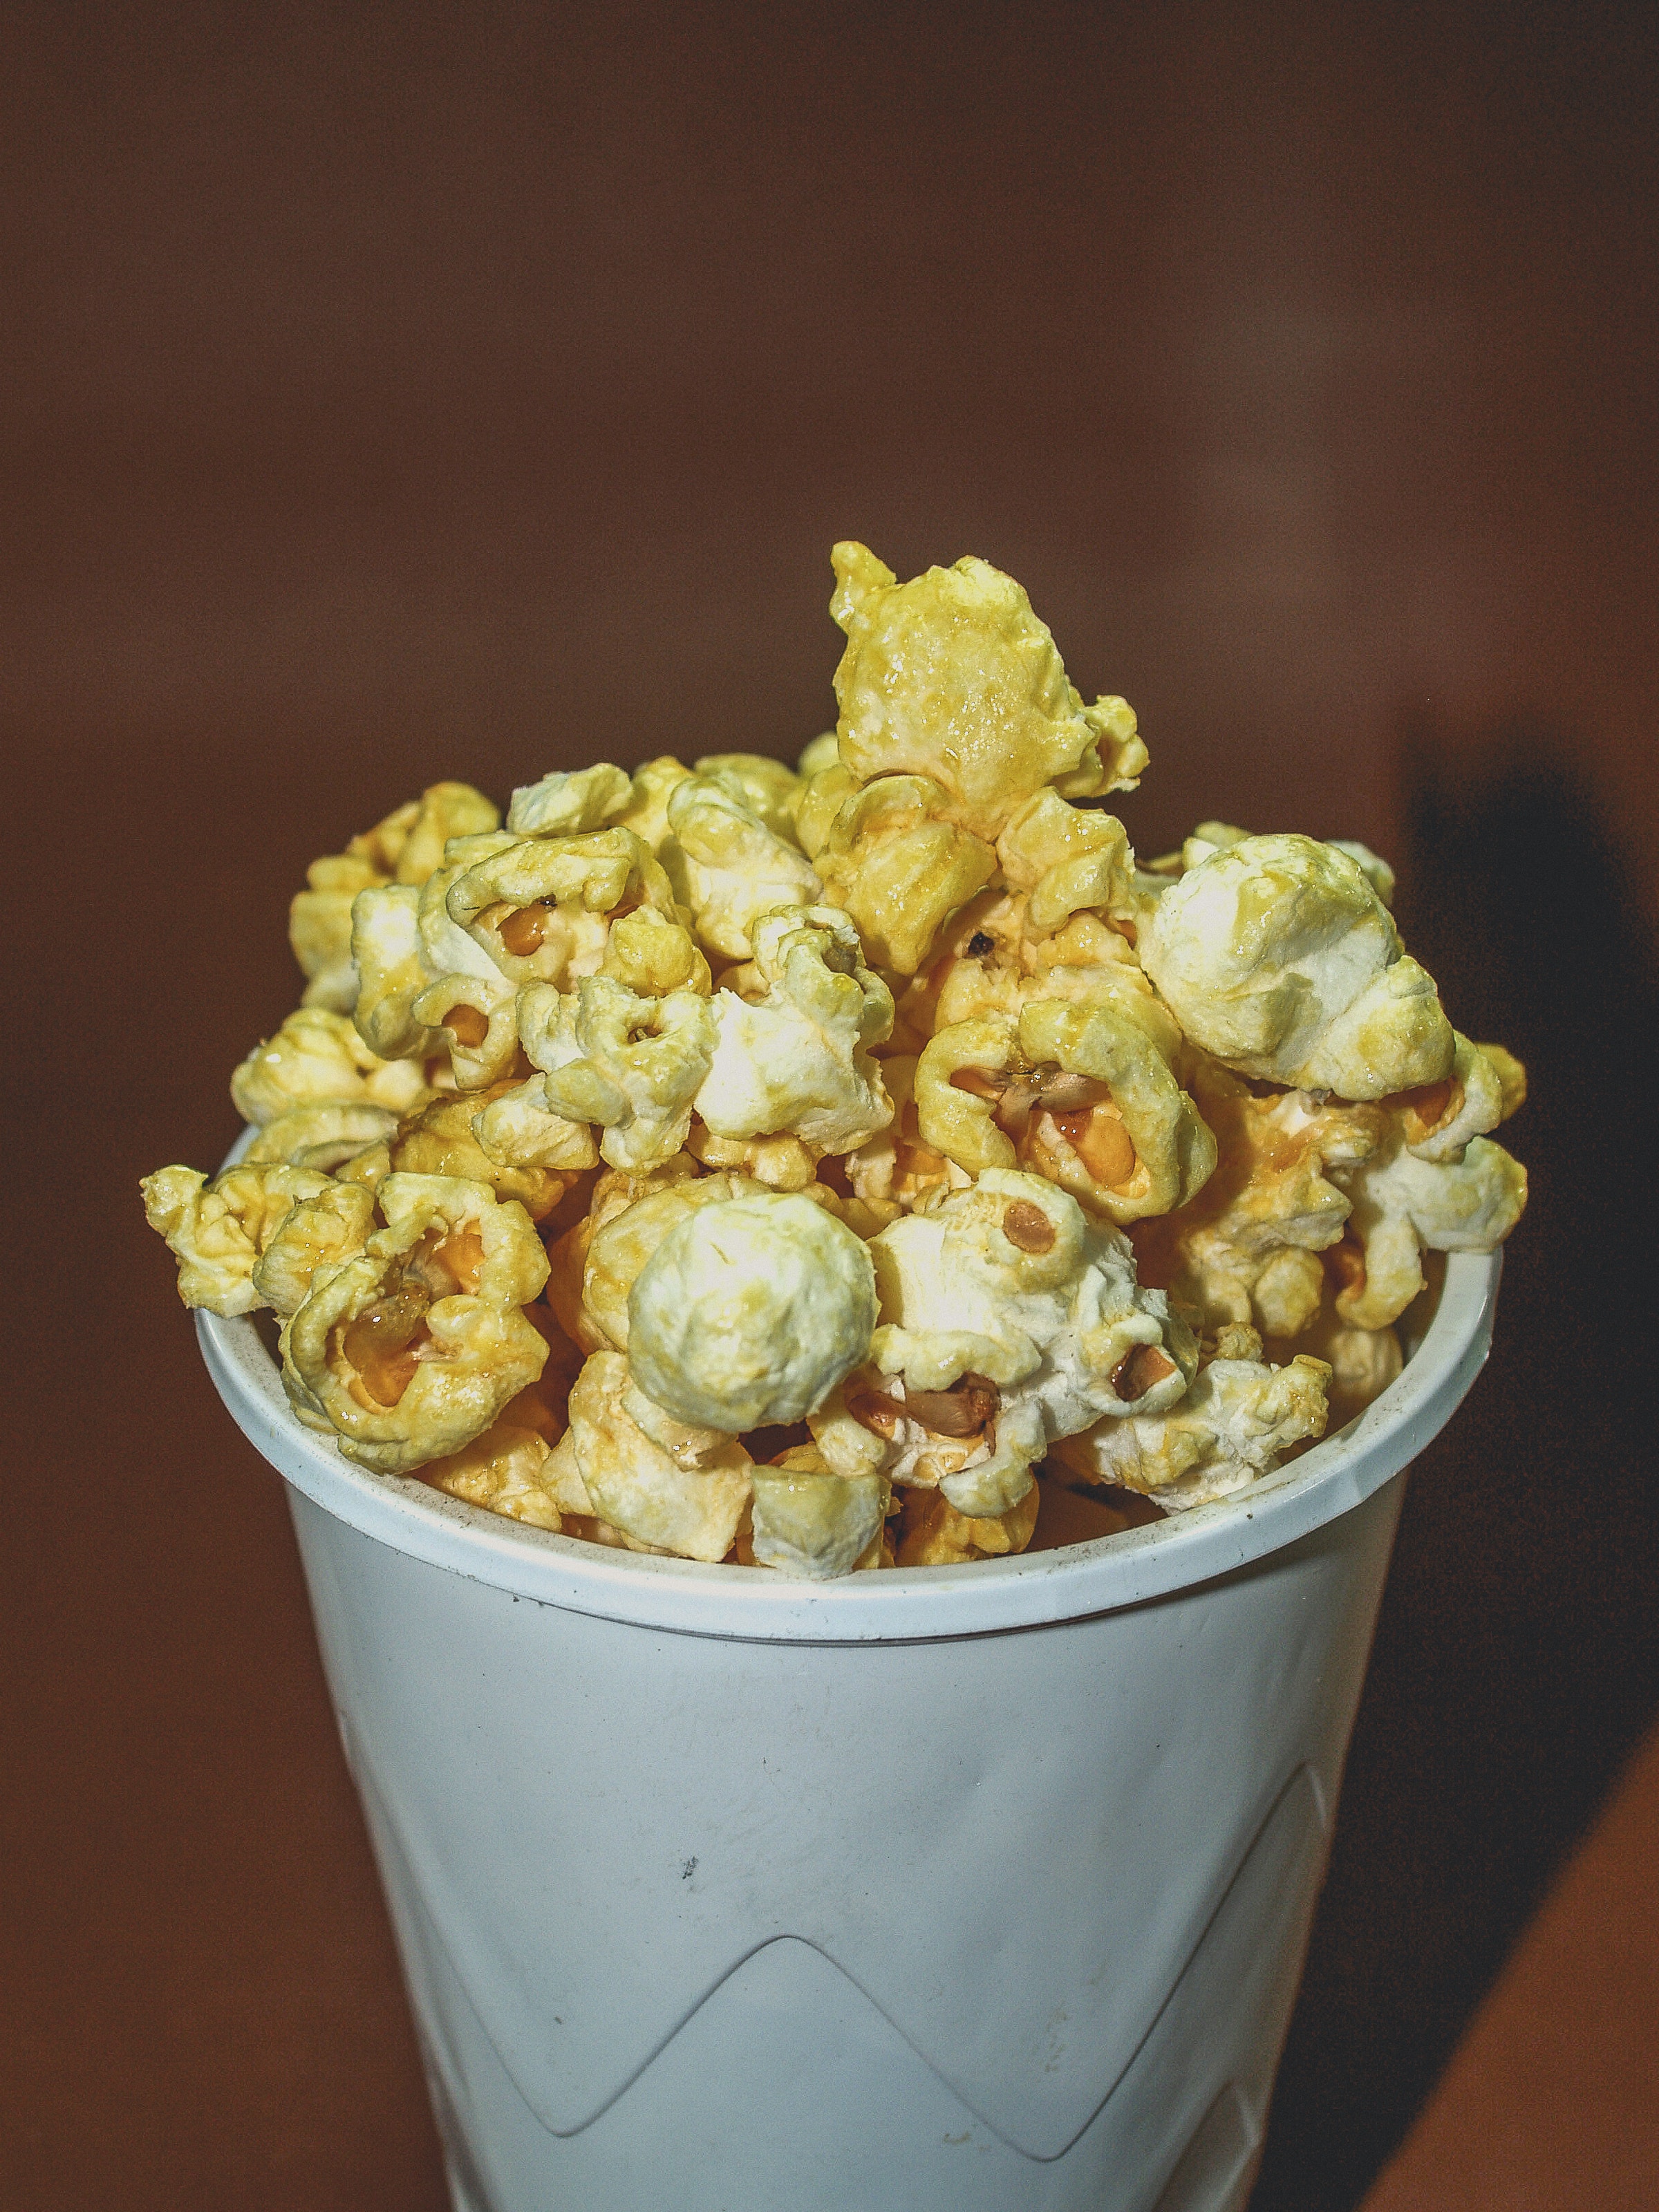 High quality specialty popcorn business-272393-JM